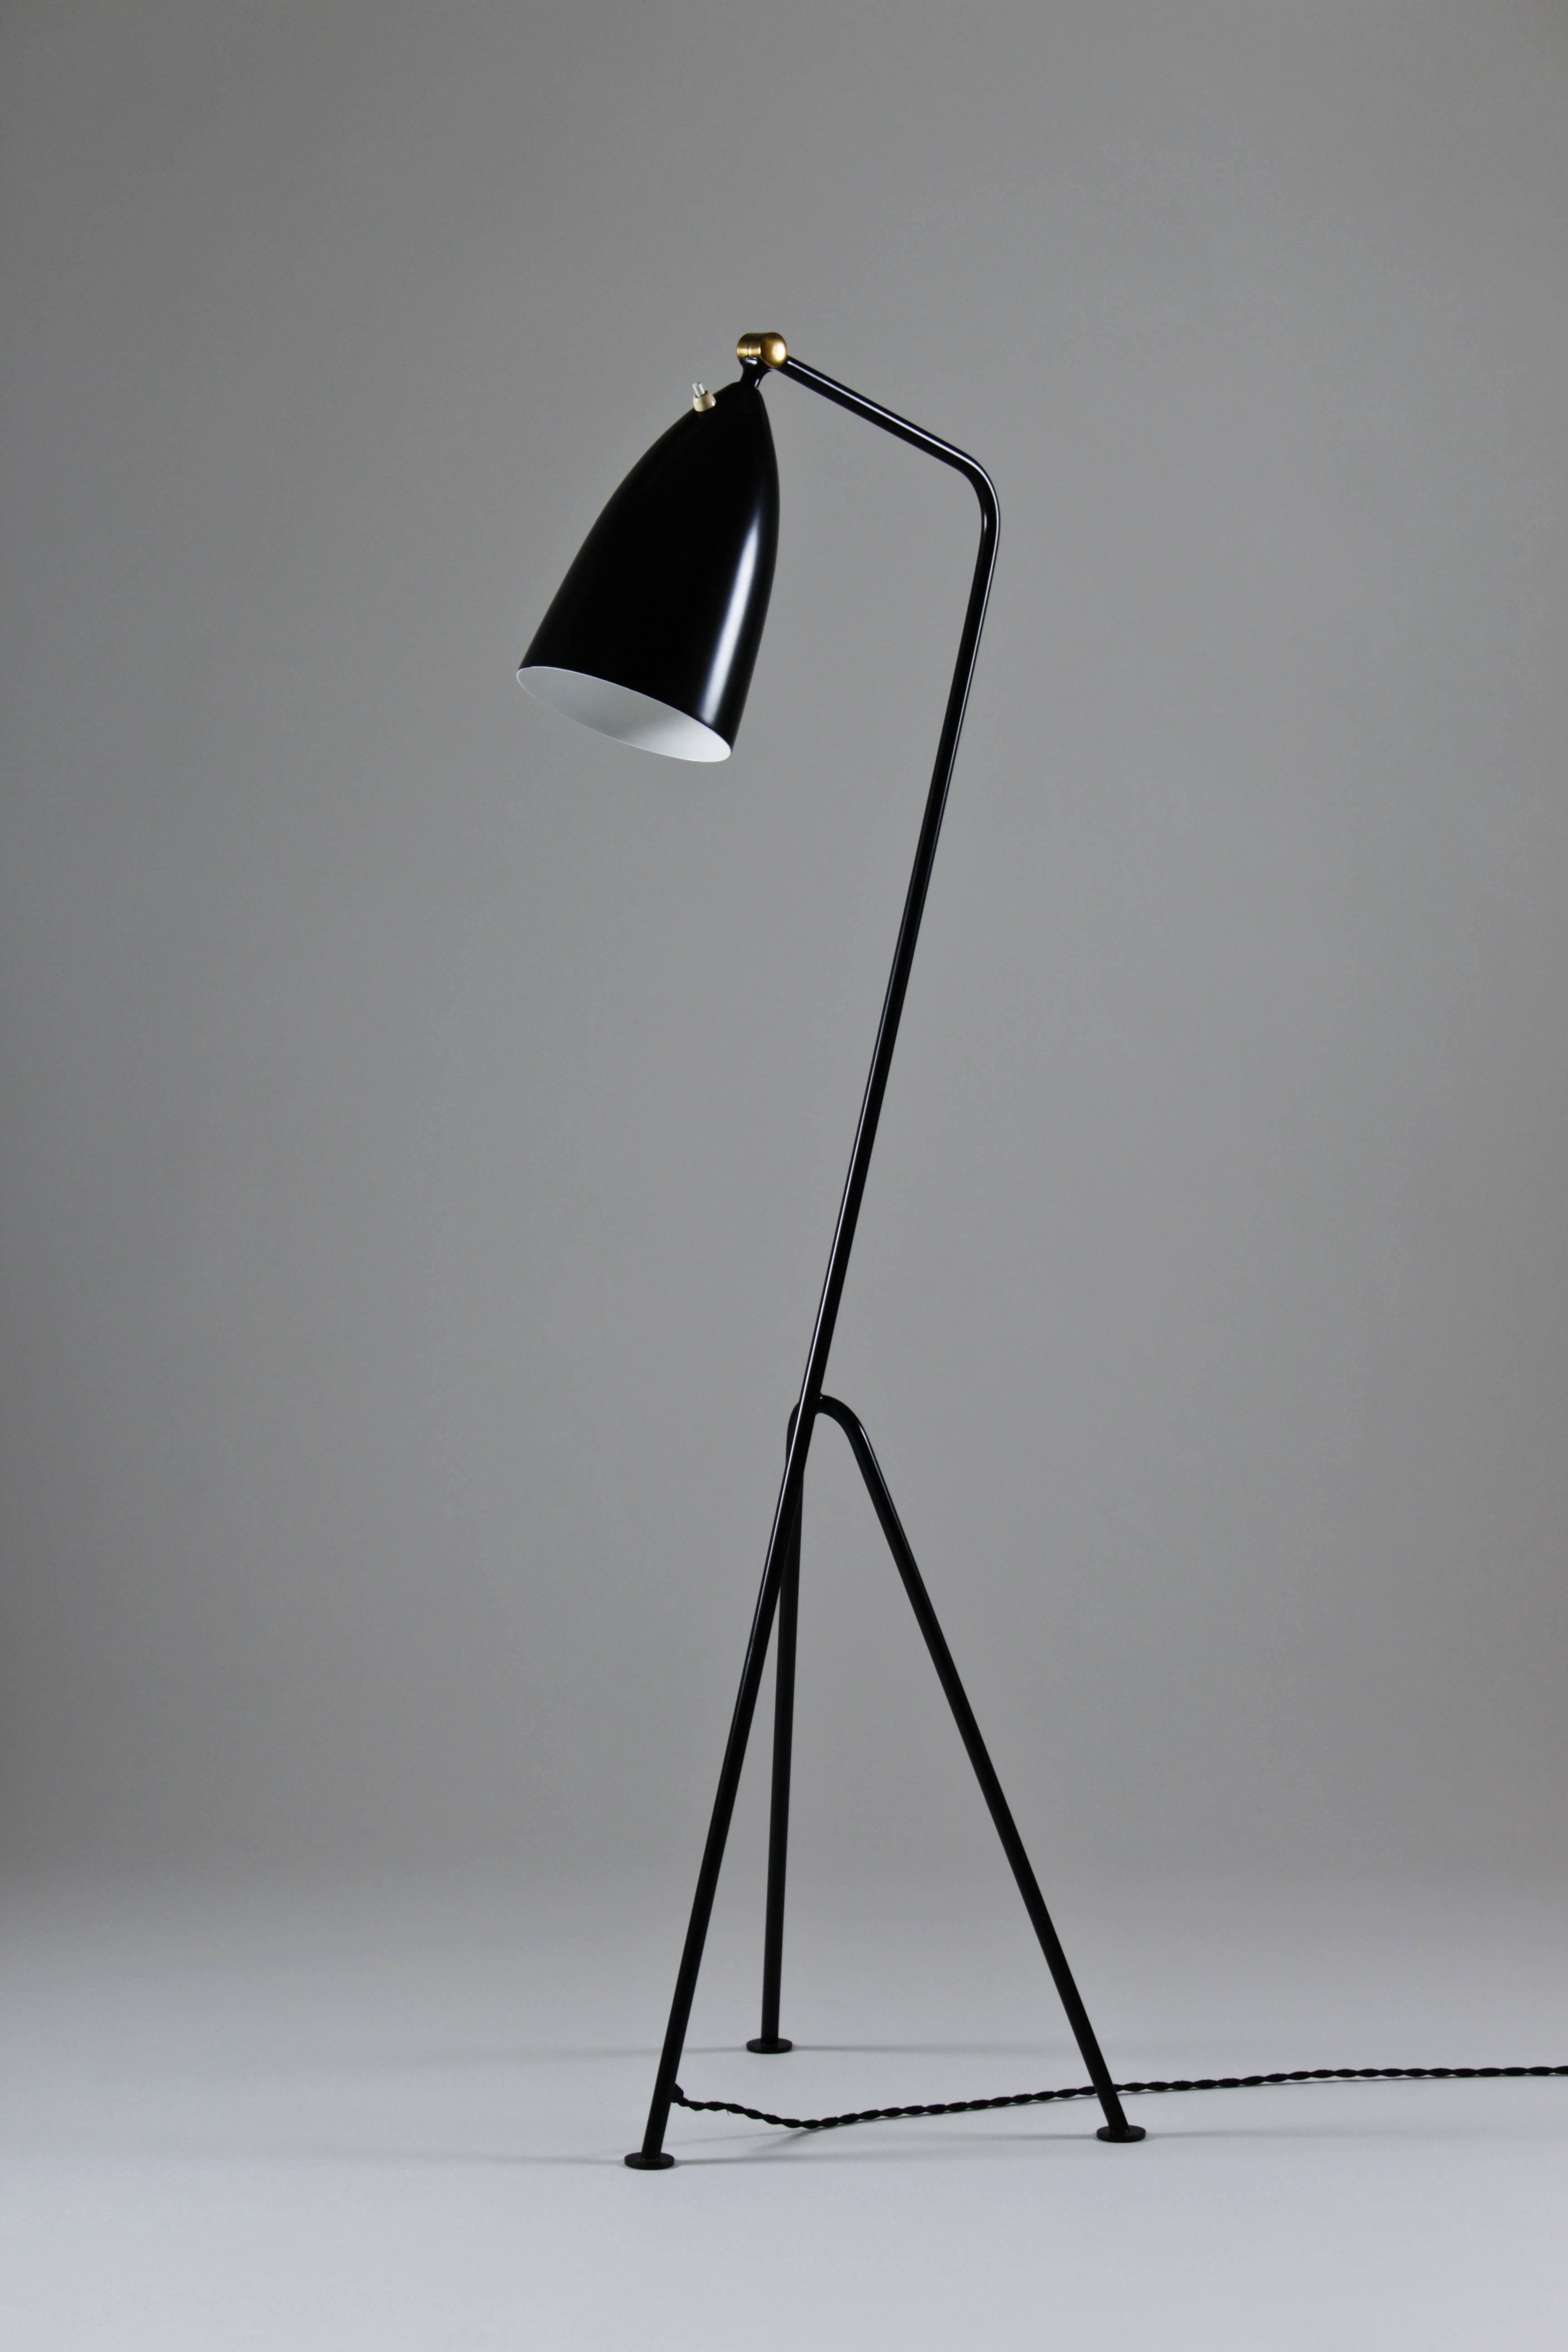 Grasshopper floor lamp in black metal, designed in 1947 by Greta Grossman for Bergboms. The lamp is fully restored and professionally repainted. All the parts are original except for the wiring.